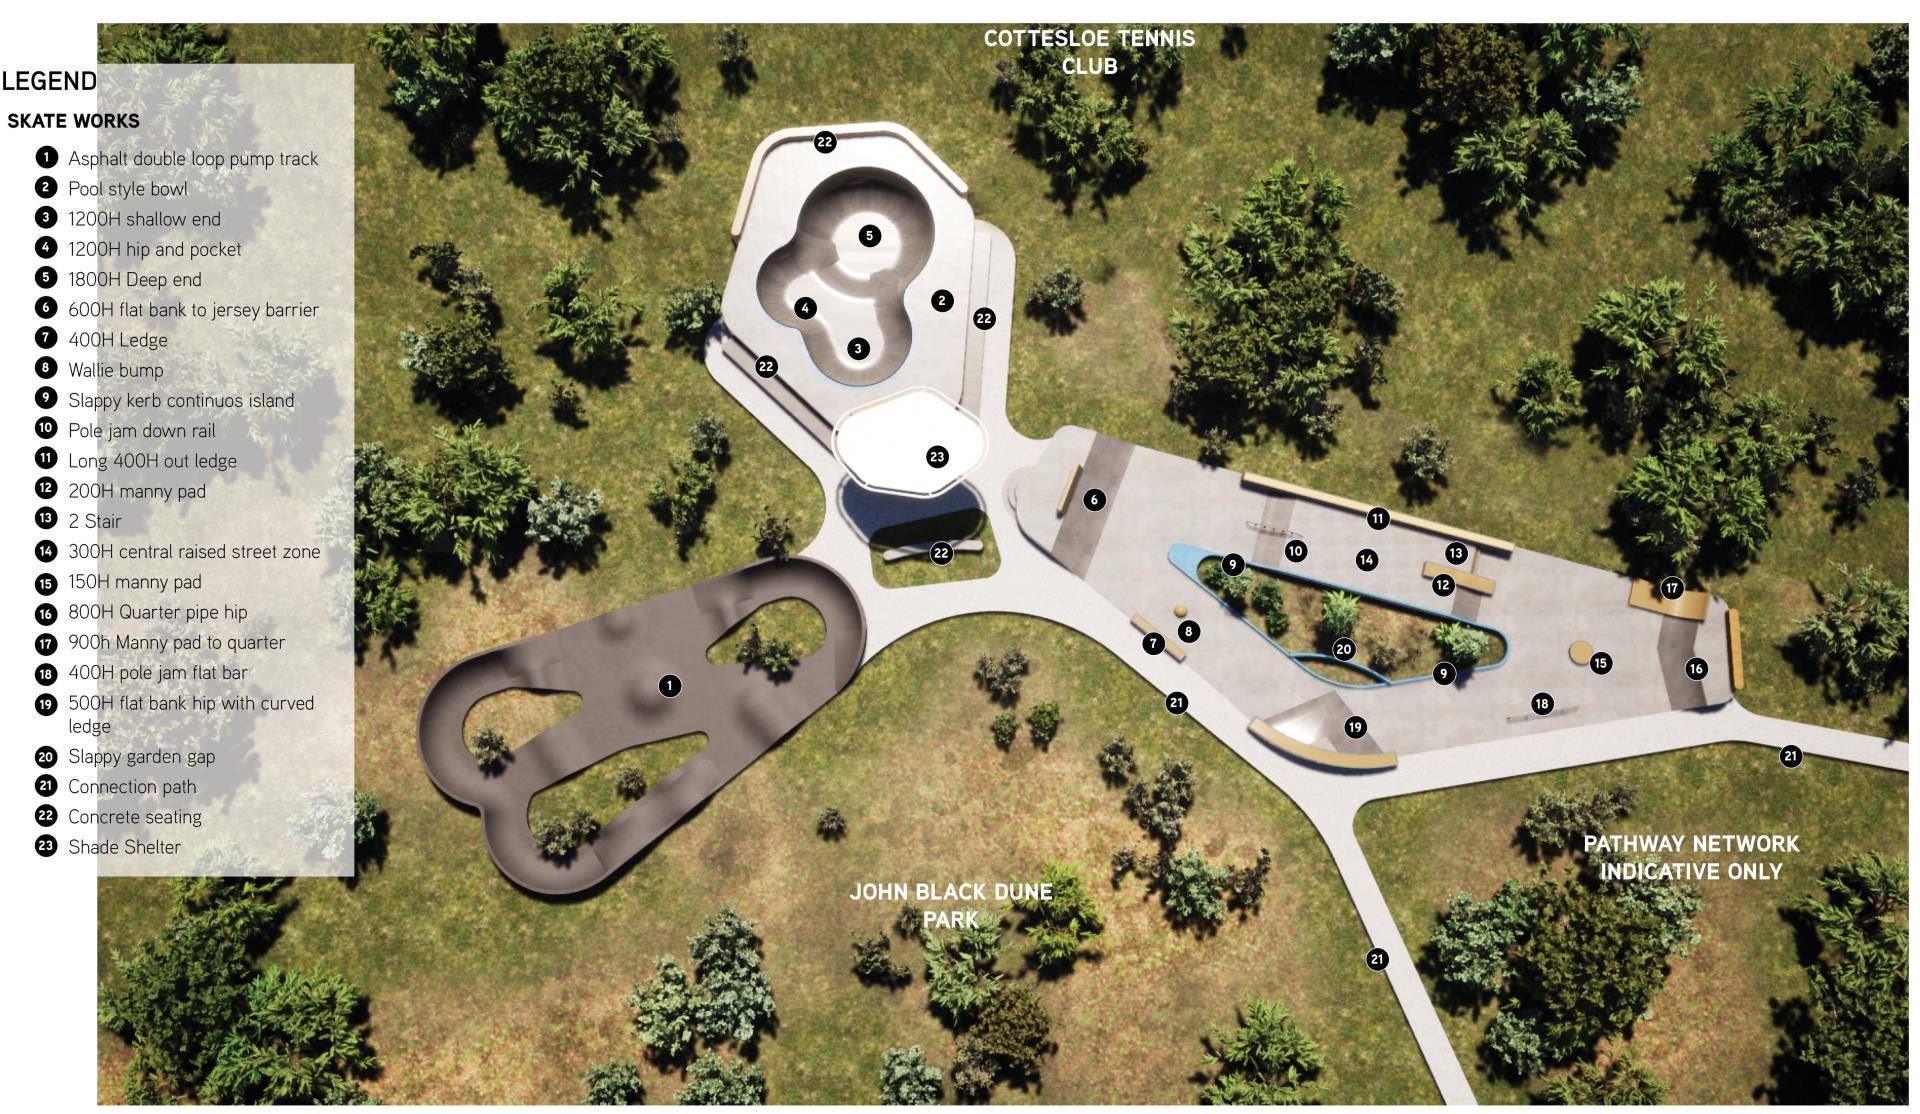 TOWN OF COTTESLOE SUCCESSFUL IN SKATE PARK GRANT FUNDING